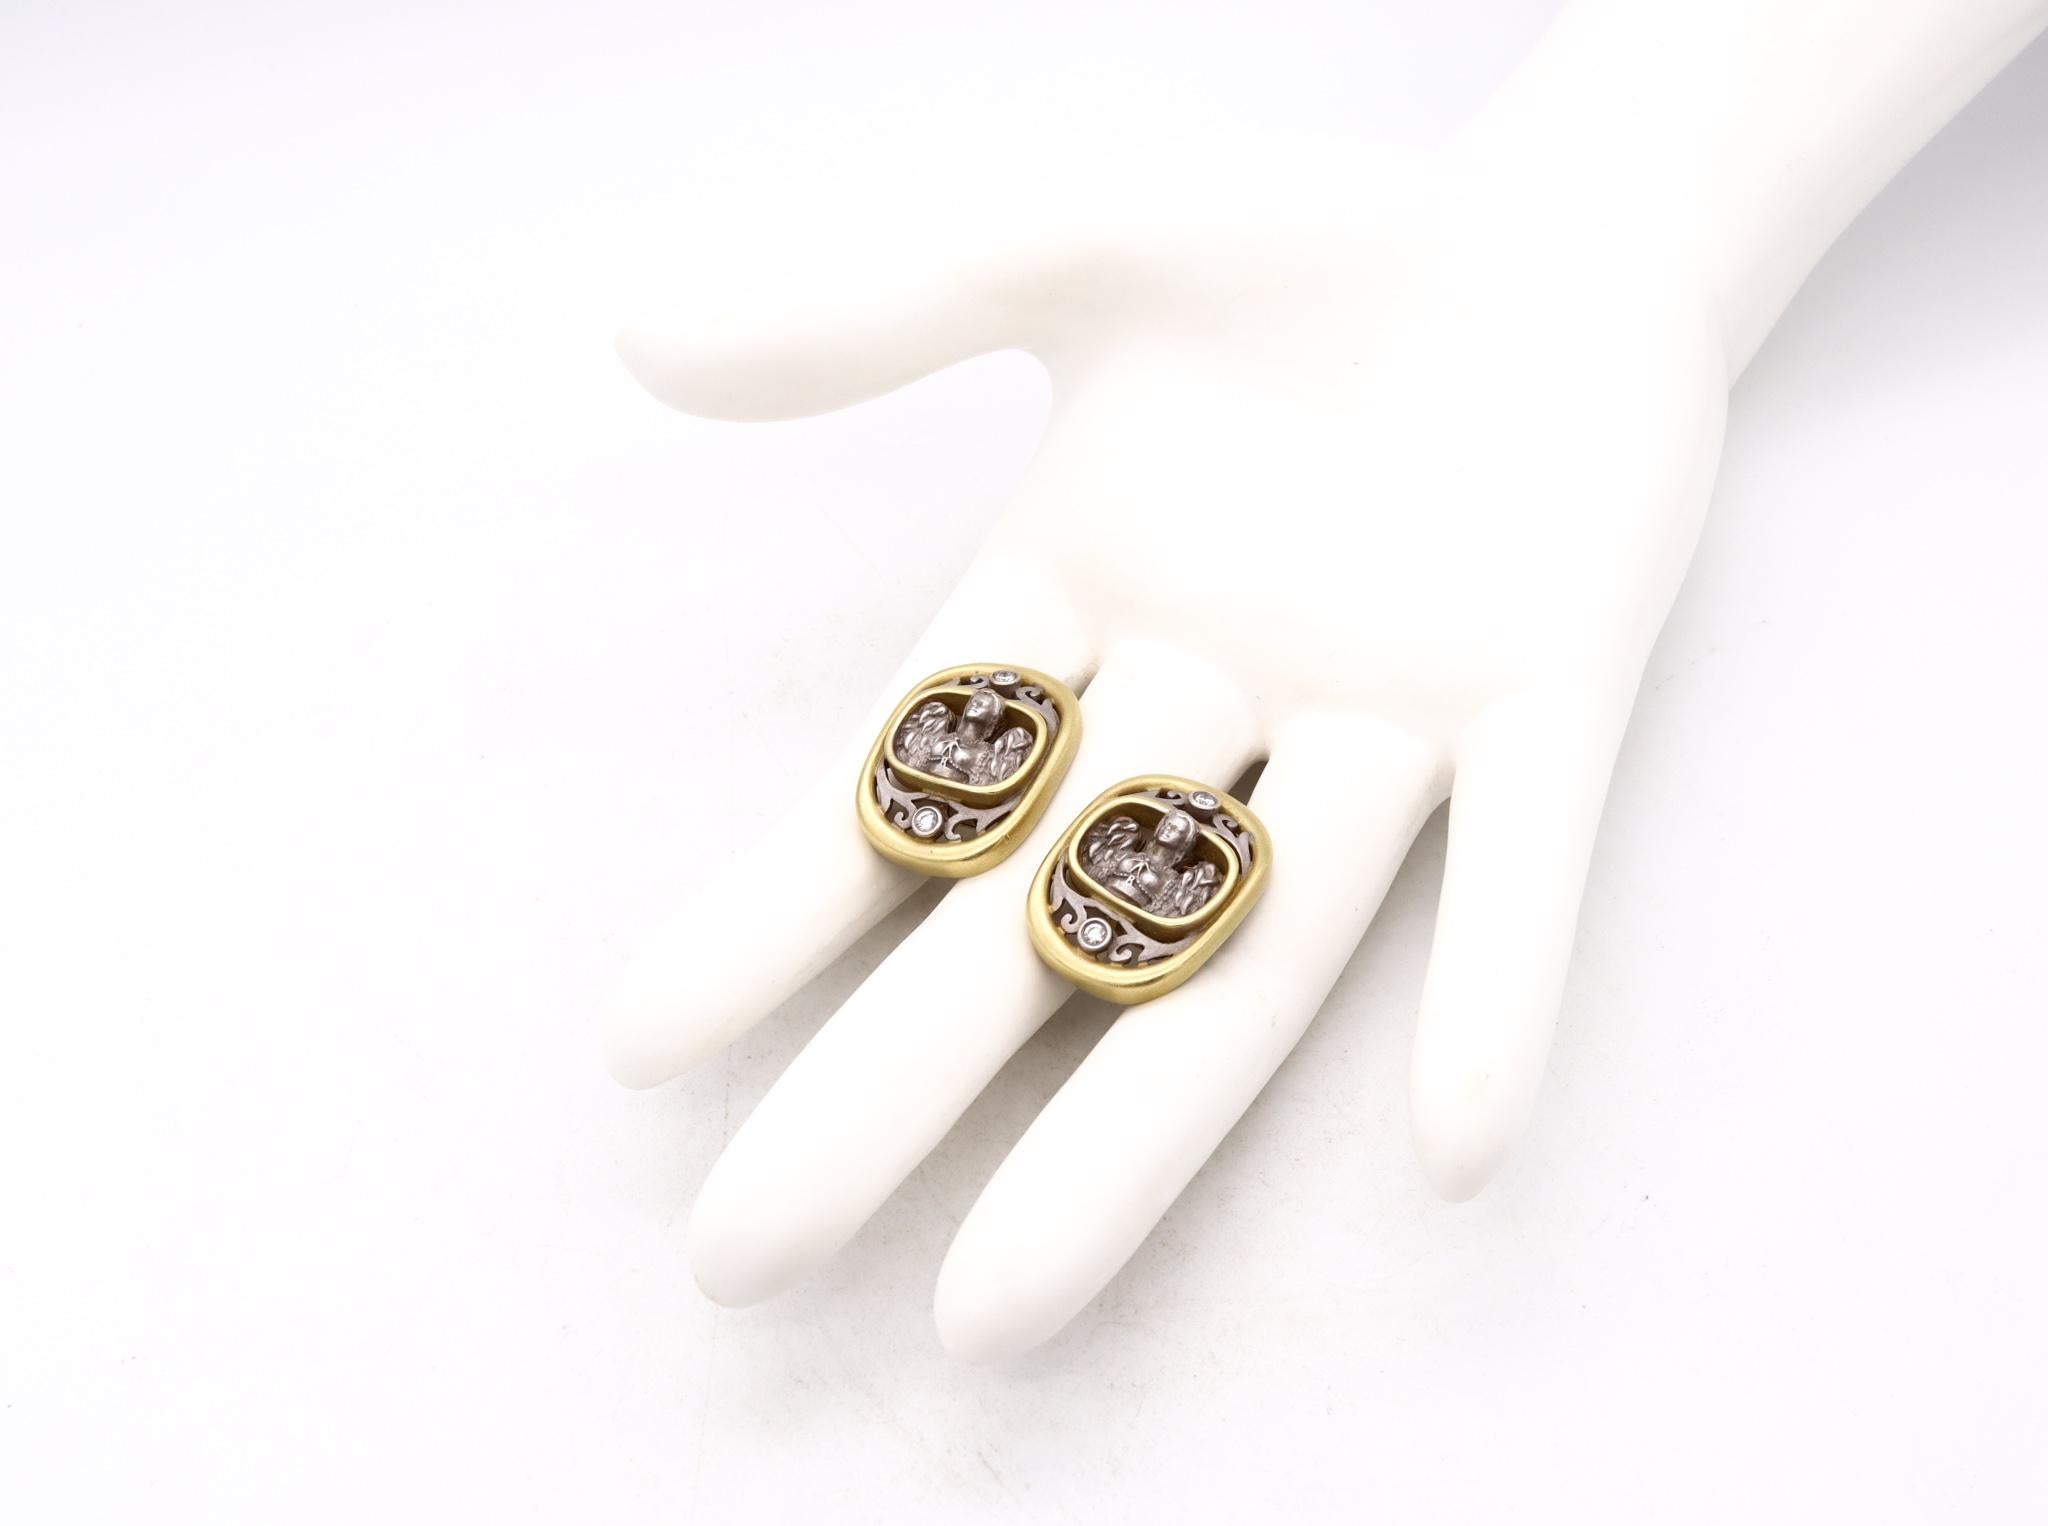 Etruscan Revival Kieselstein Cord 2001 Classic Etruscan Clips Earrings 18Kt Gold With VS Diamonds For Sale